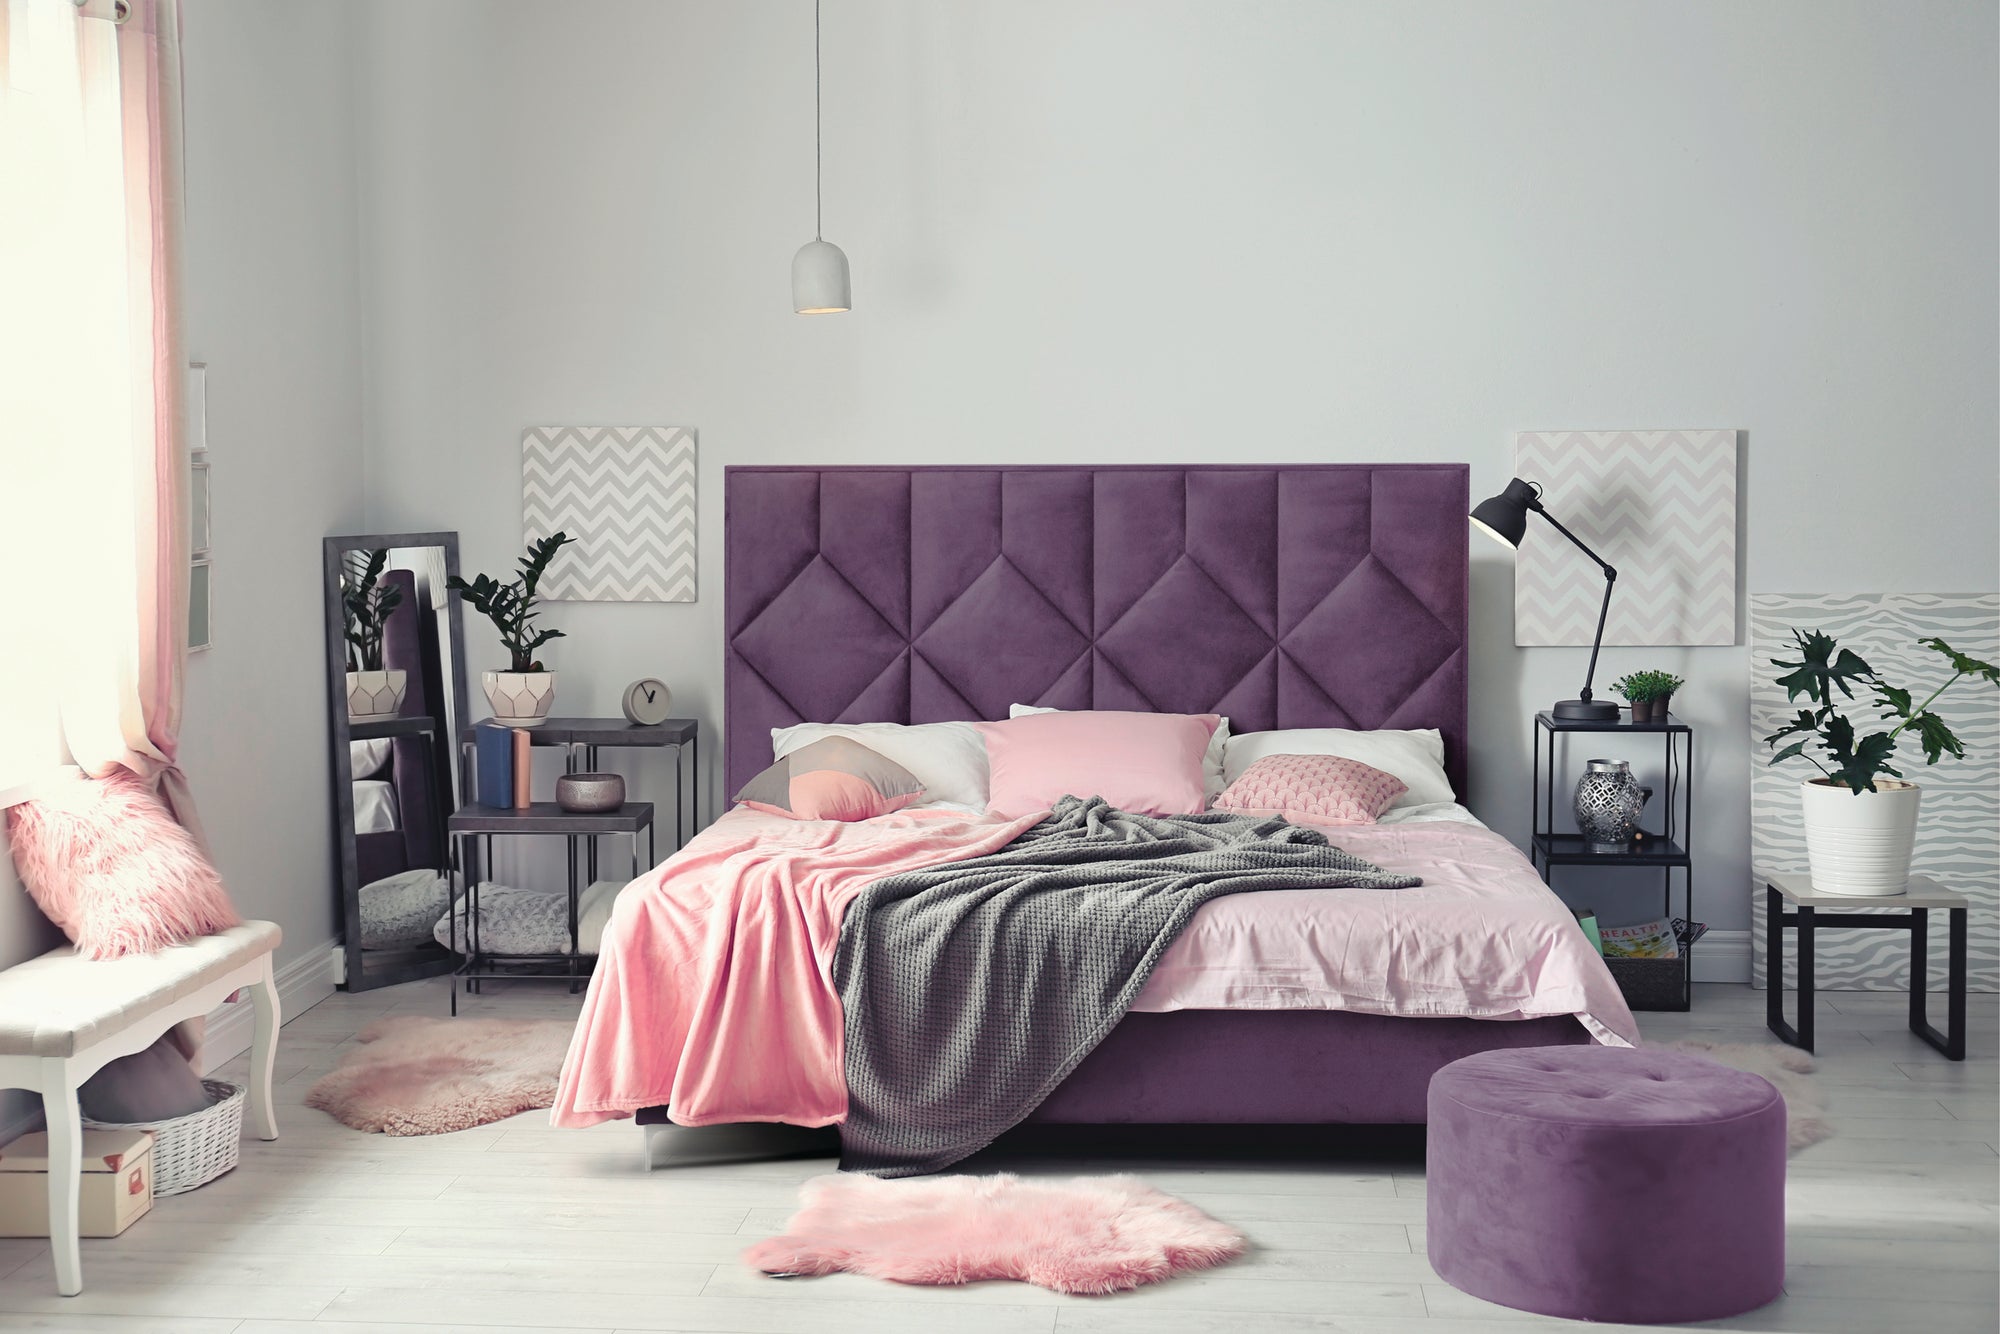 Axel bed frame